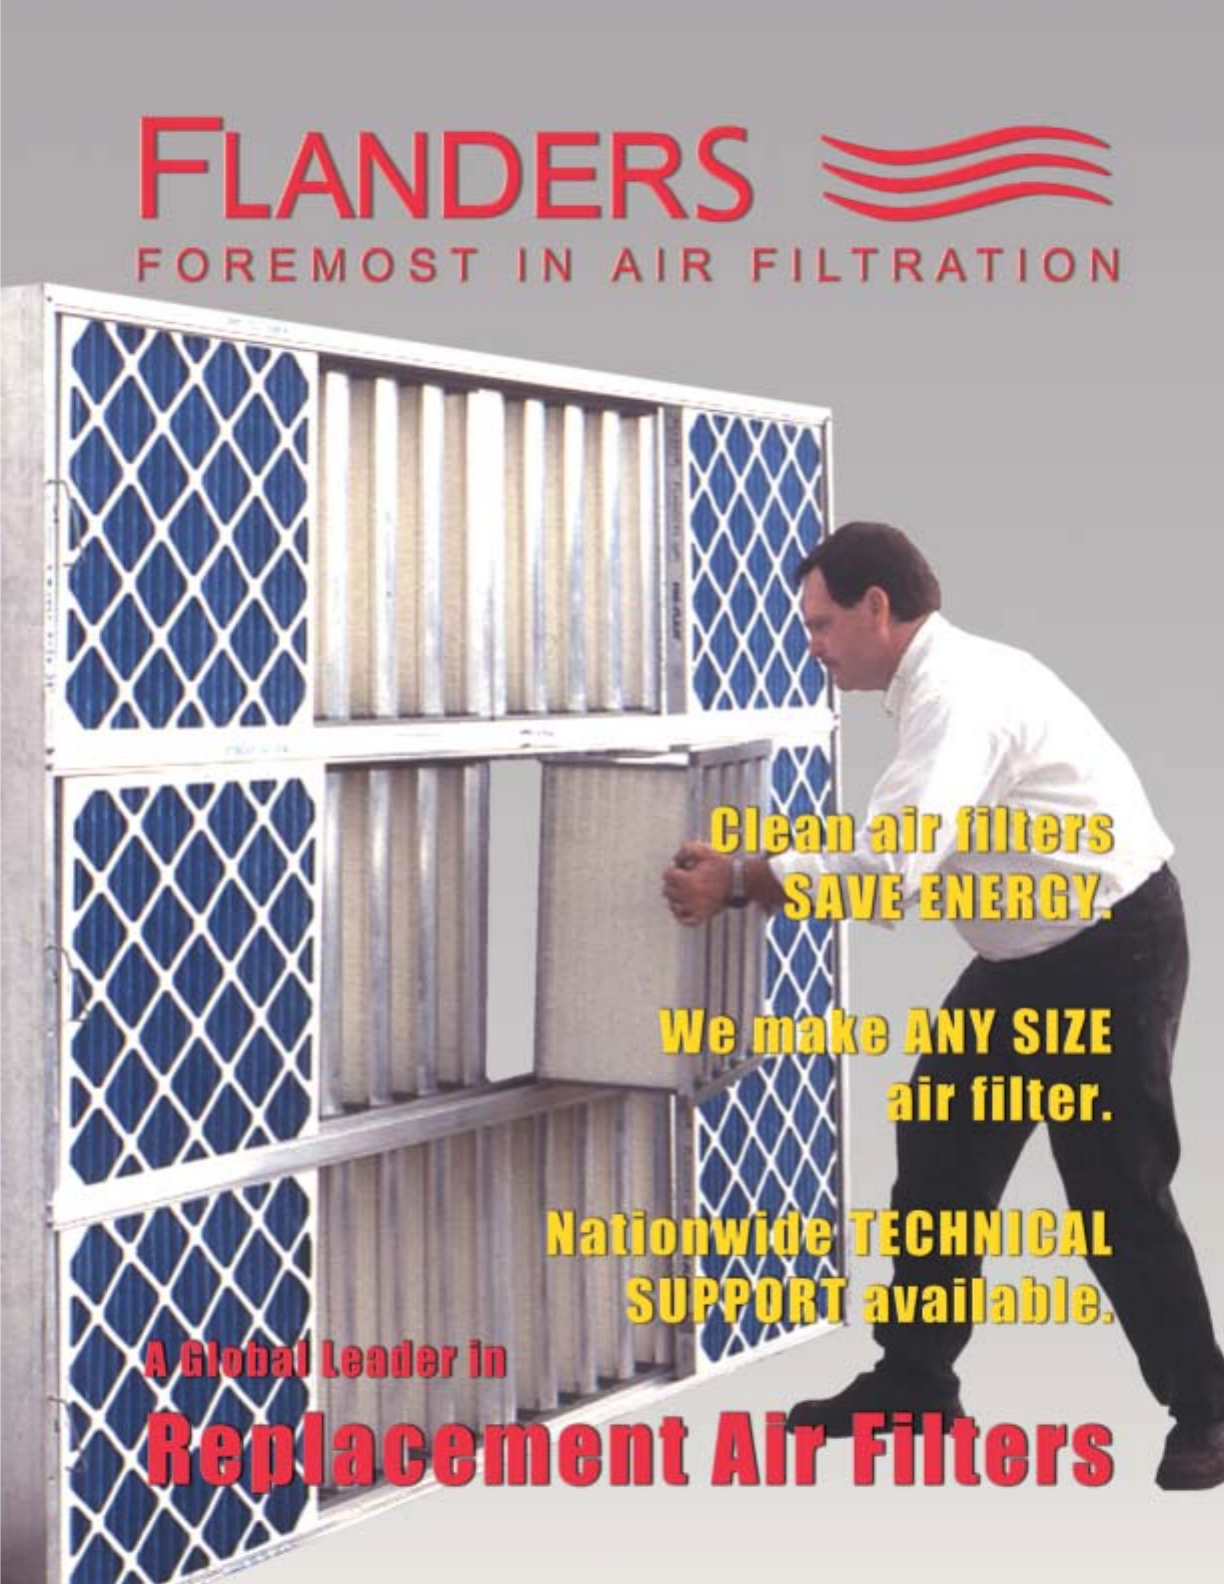 Microfiberglass Wire-Backed Pleated Air Filter 8 Pack 20 Nom Height x 20 Nom Width x 2 Nom Depth Made in USA 